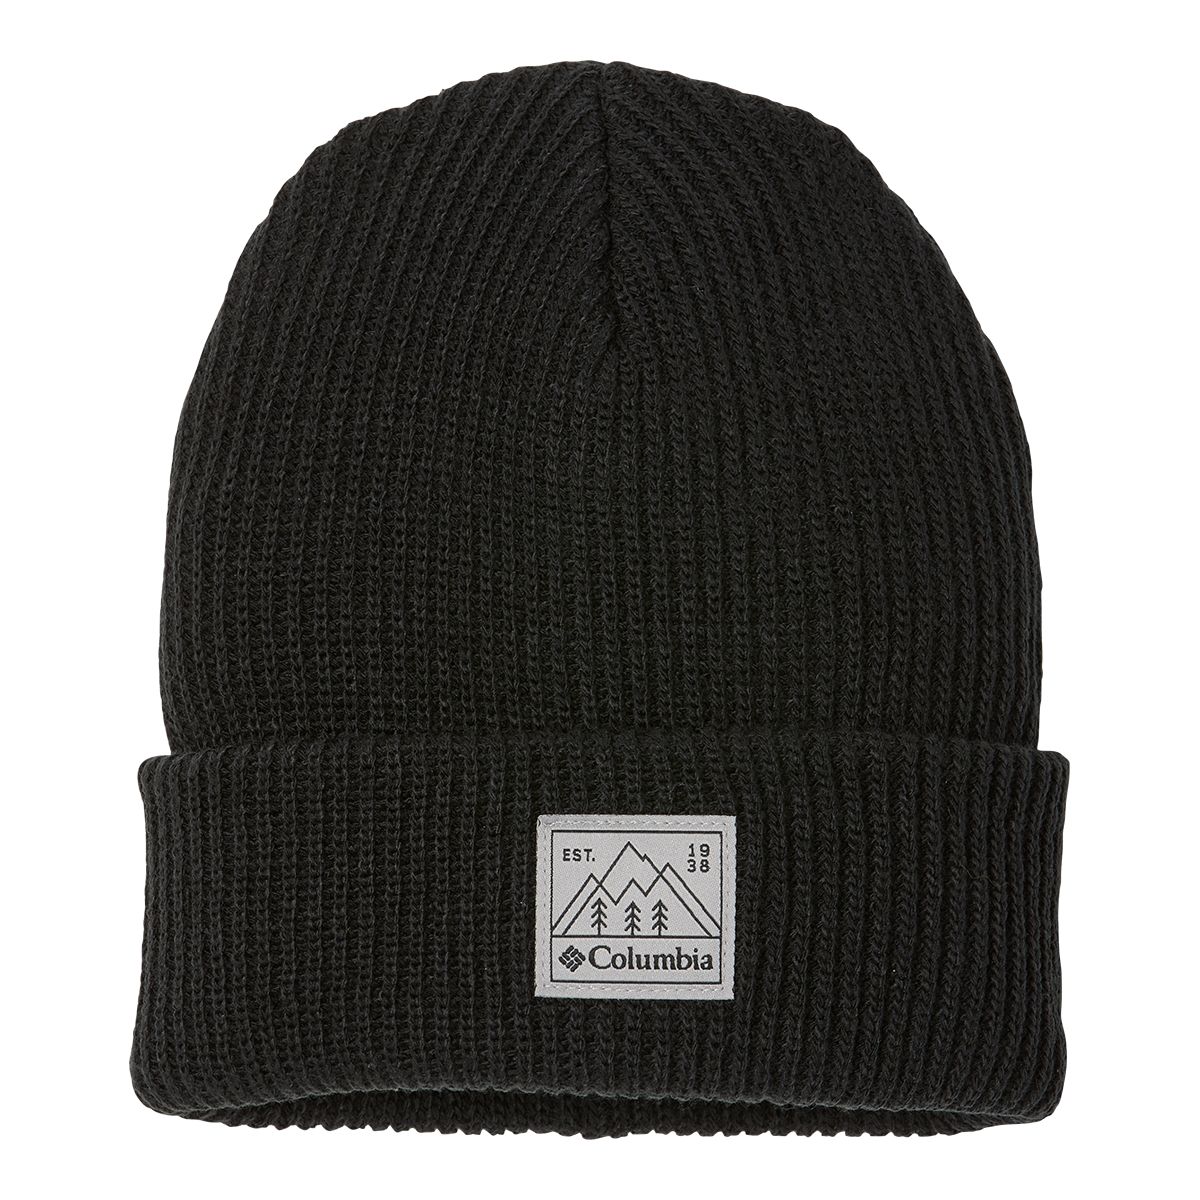 Image of Columbia Kids' Unisex Cuffed Beanie with Patch